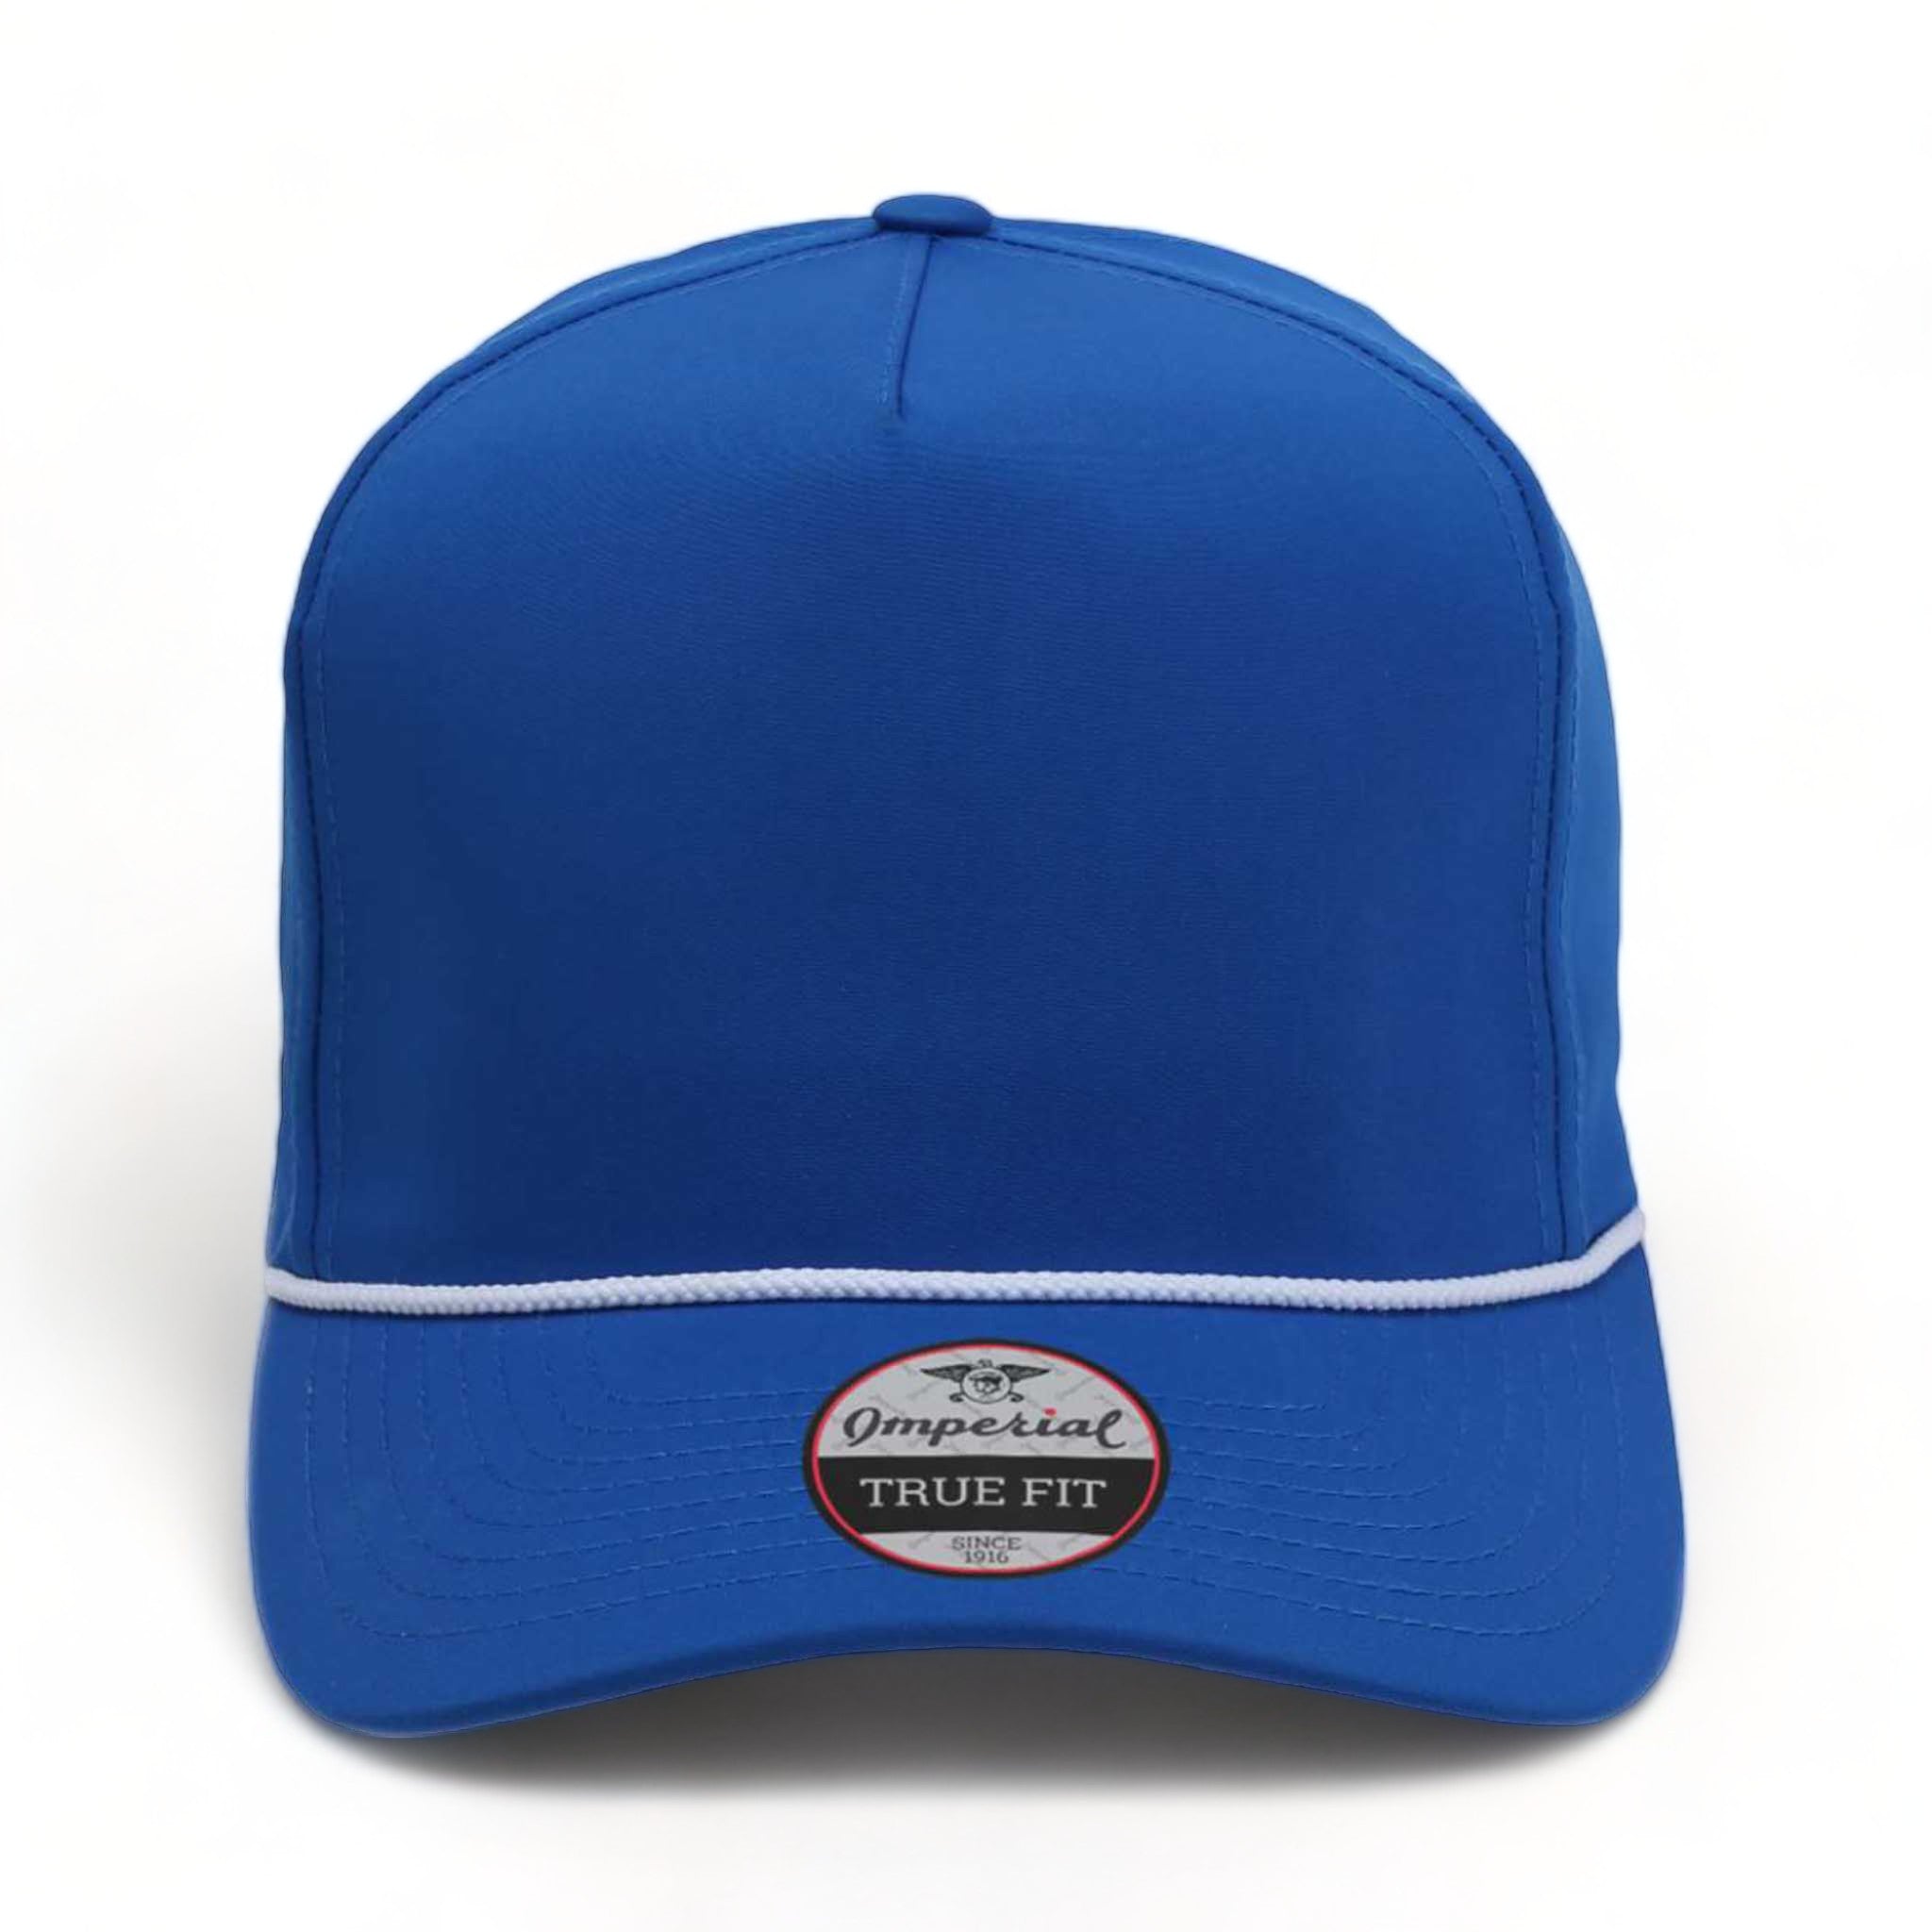 Front view of Imperial 5054 custom hat in royal and white